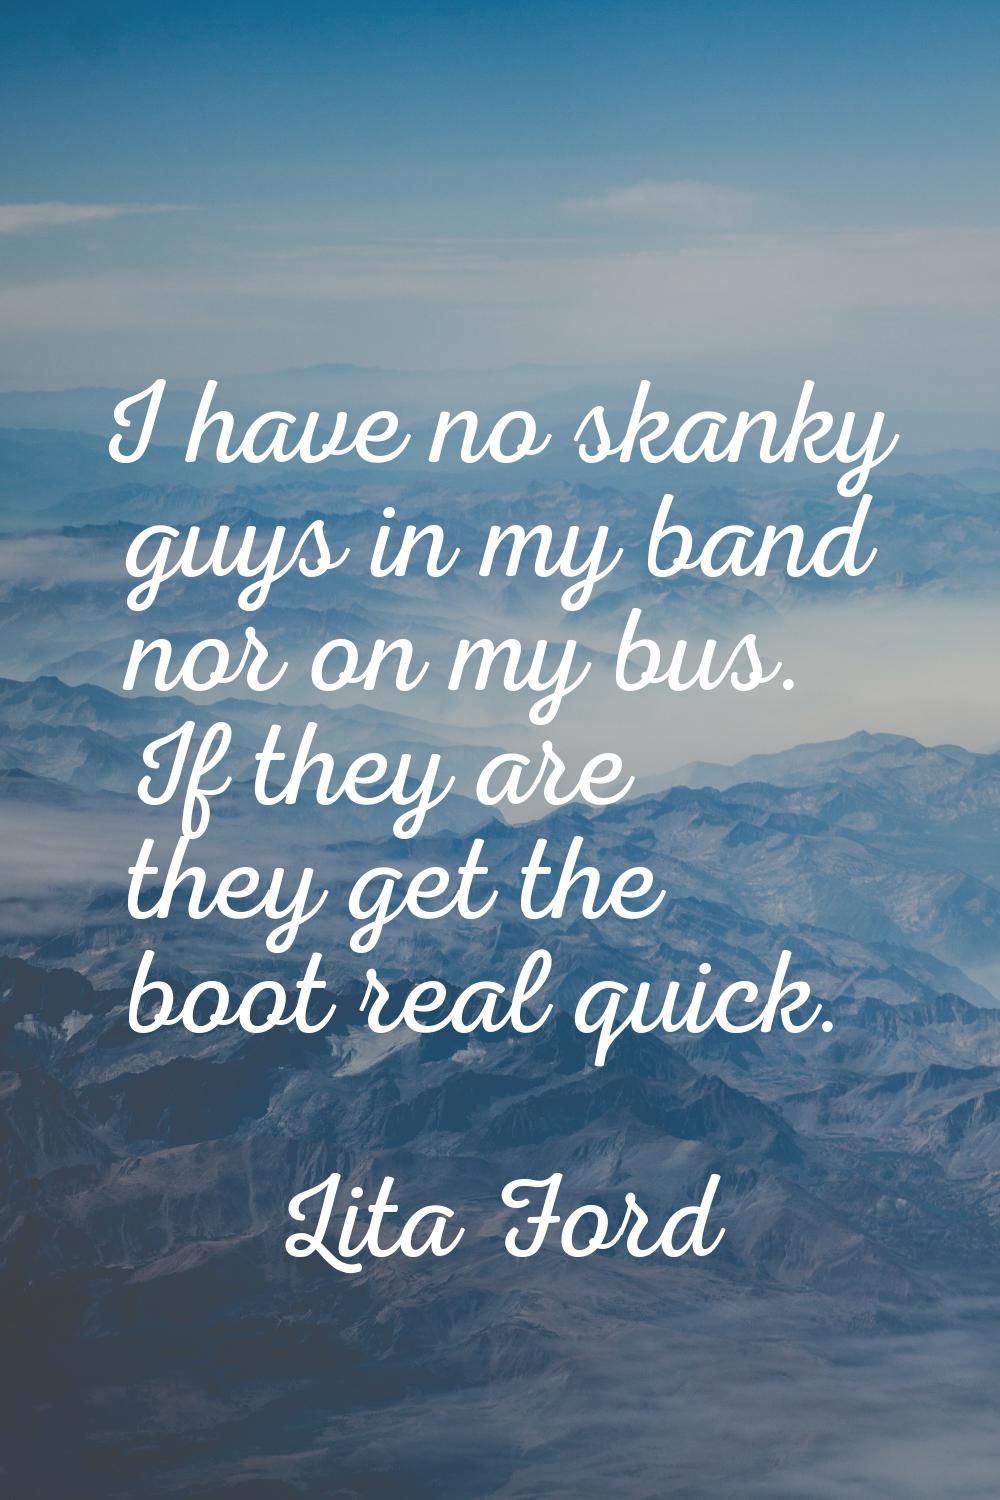 I have no skanky guys in my band nor on my bus. If they are they get the boot real quick.